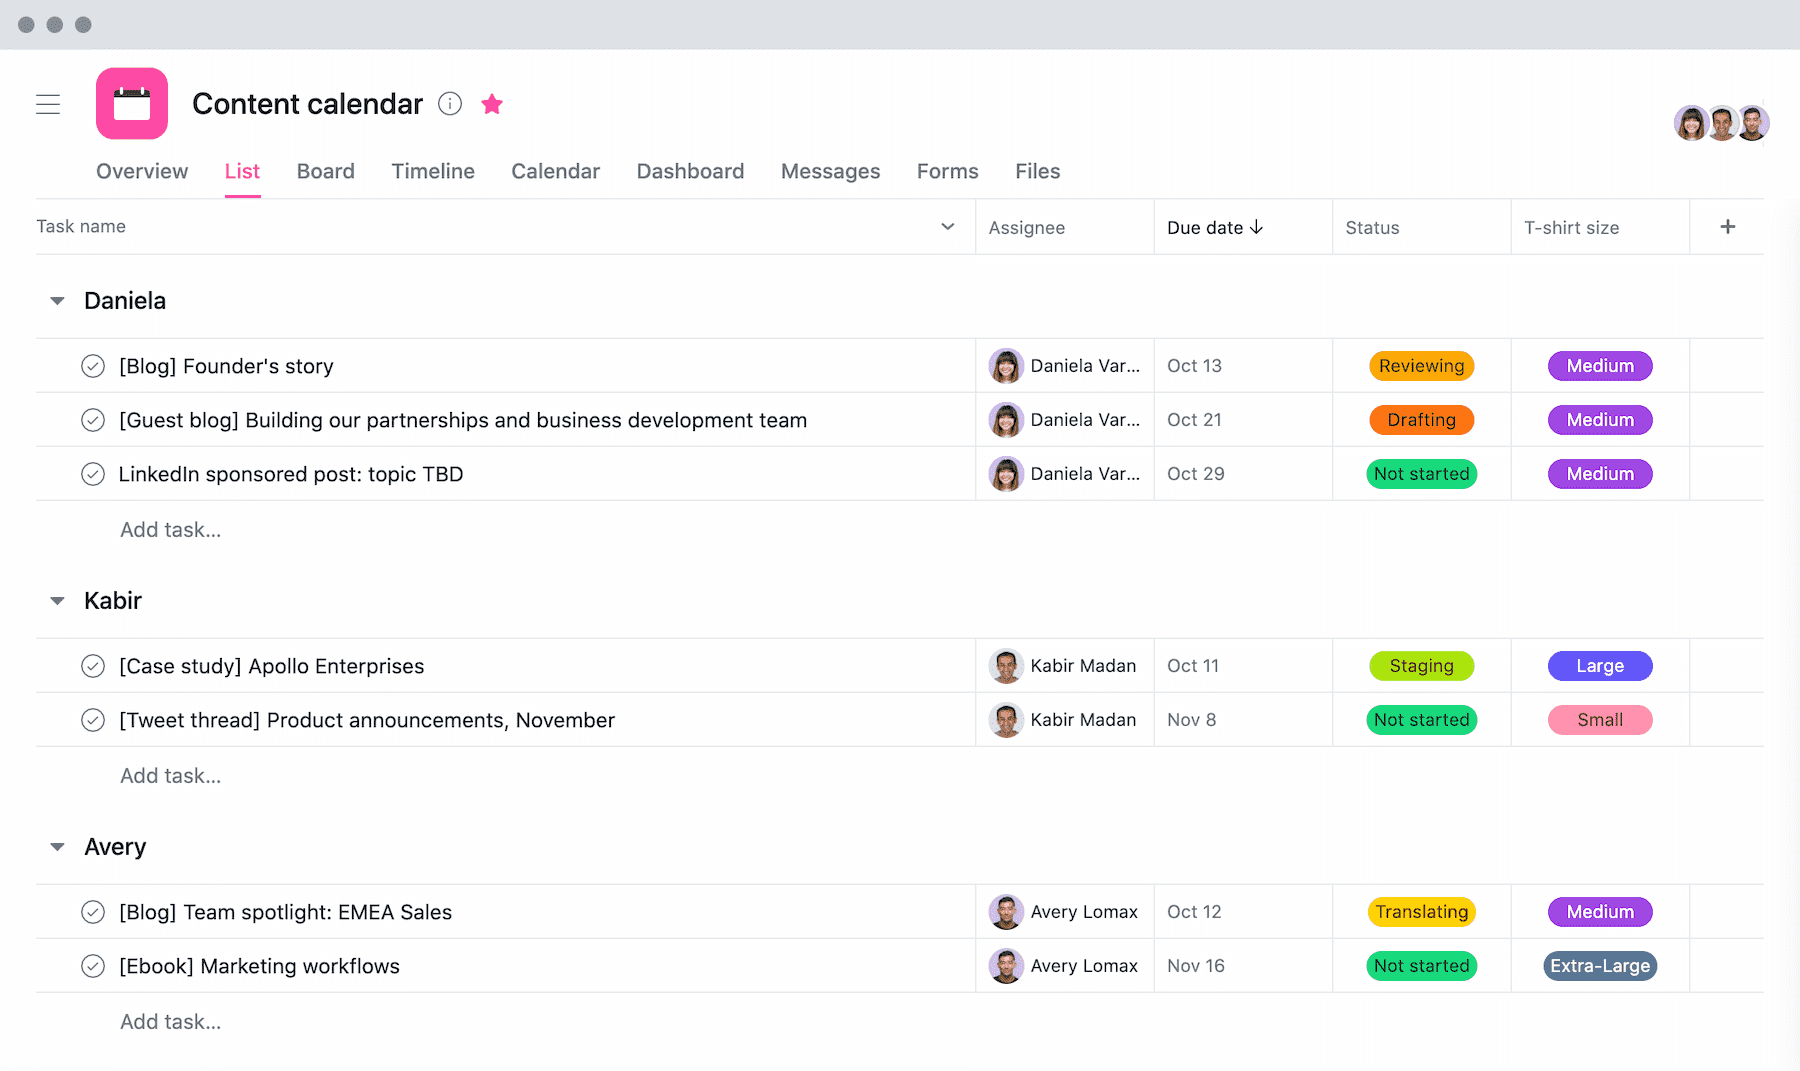 [Product UI] Content calendar project with t-shirt sizing in Asana (lists)